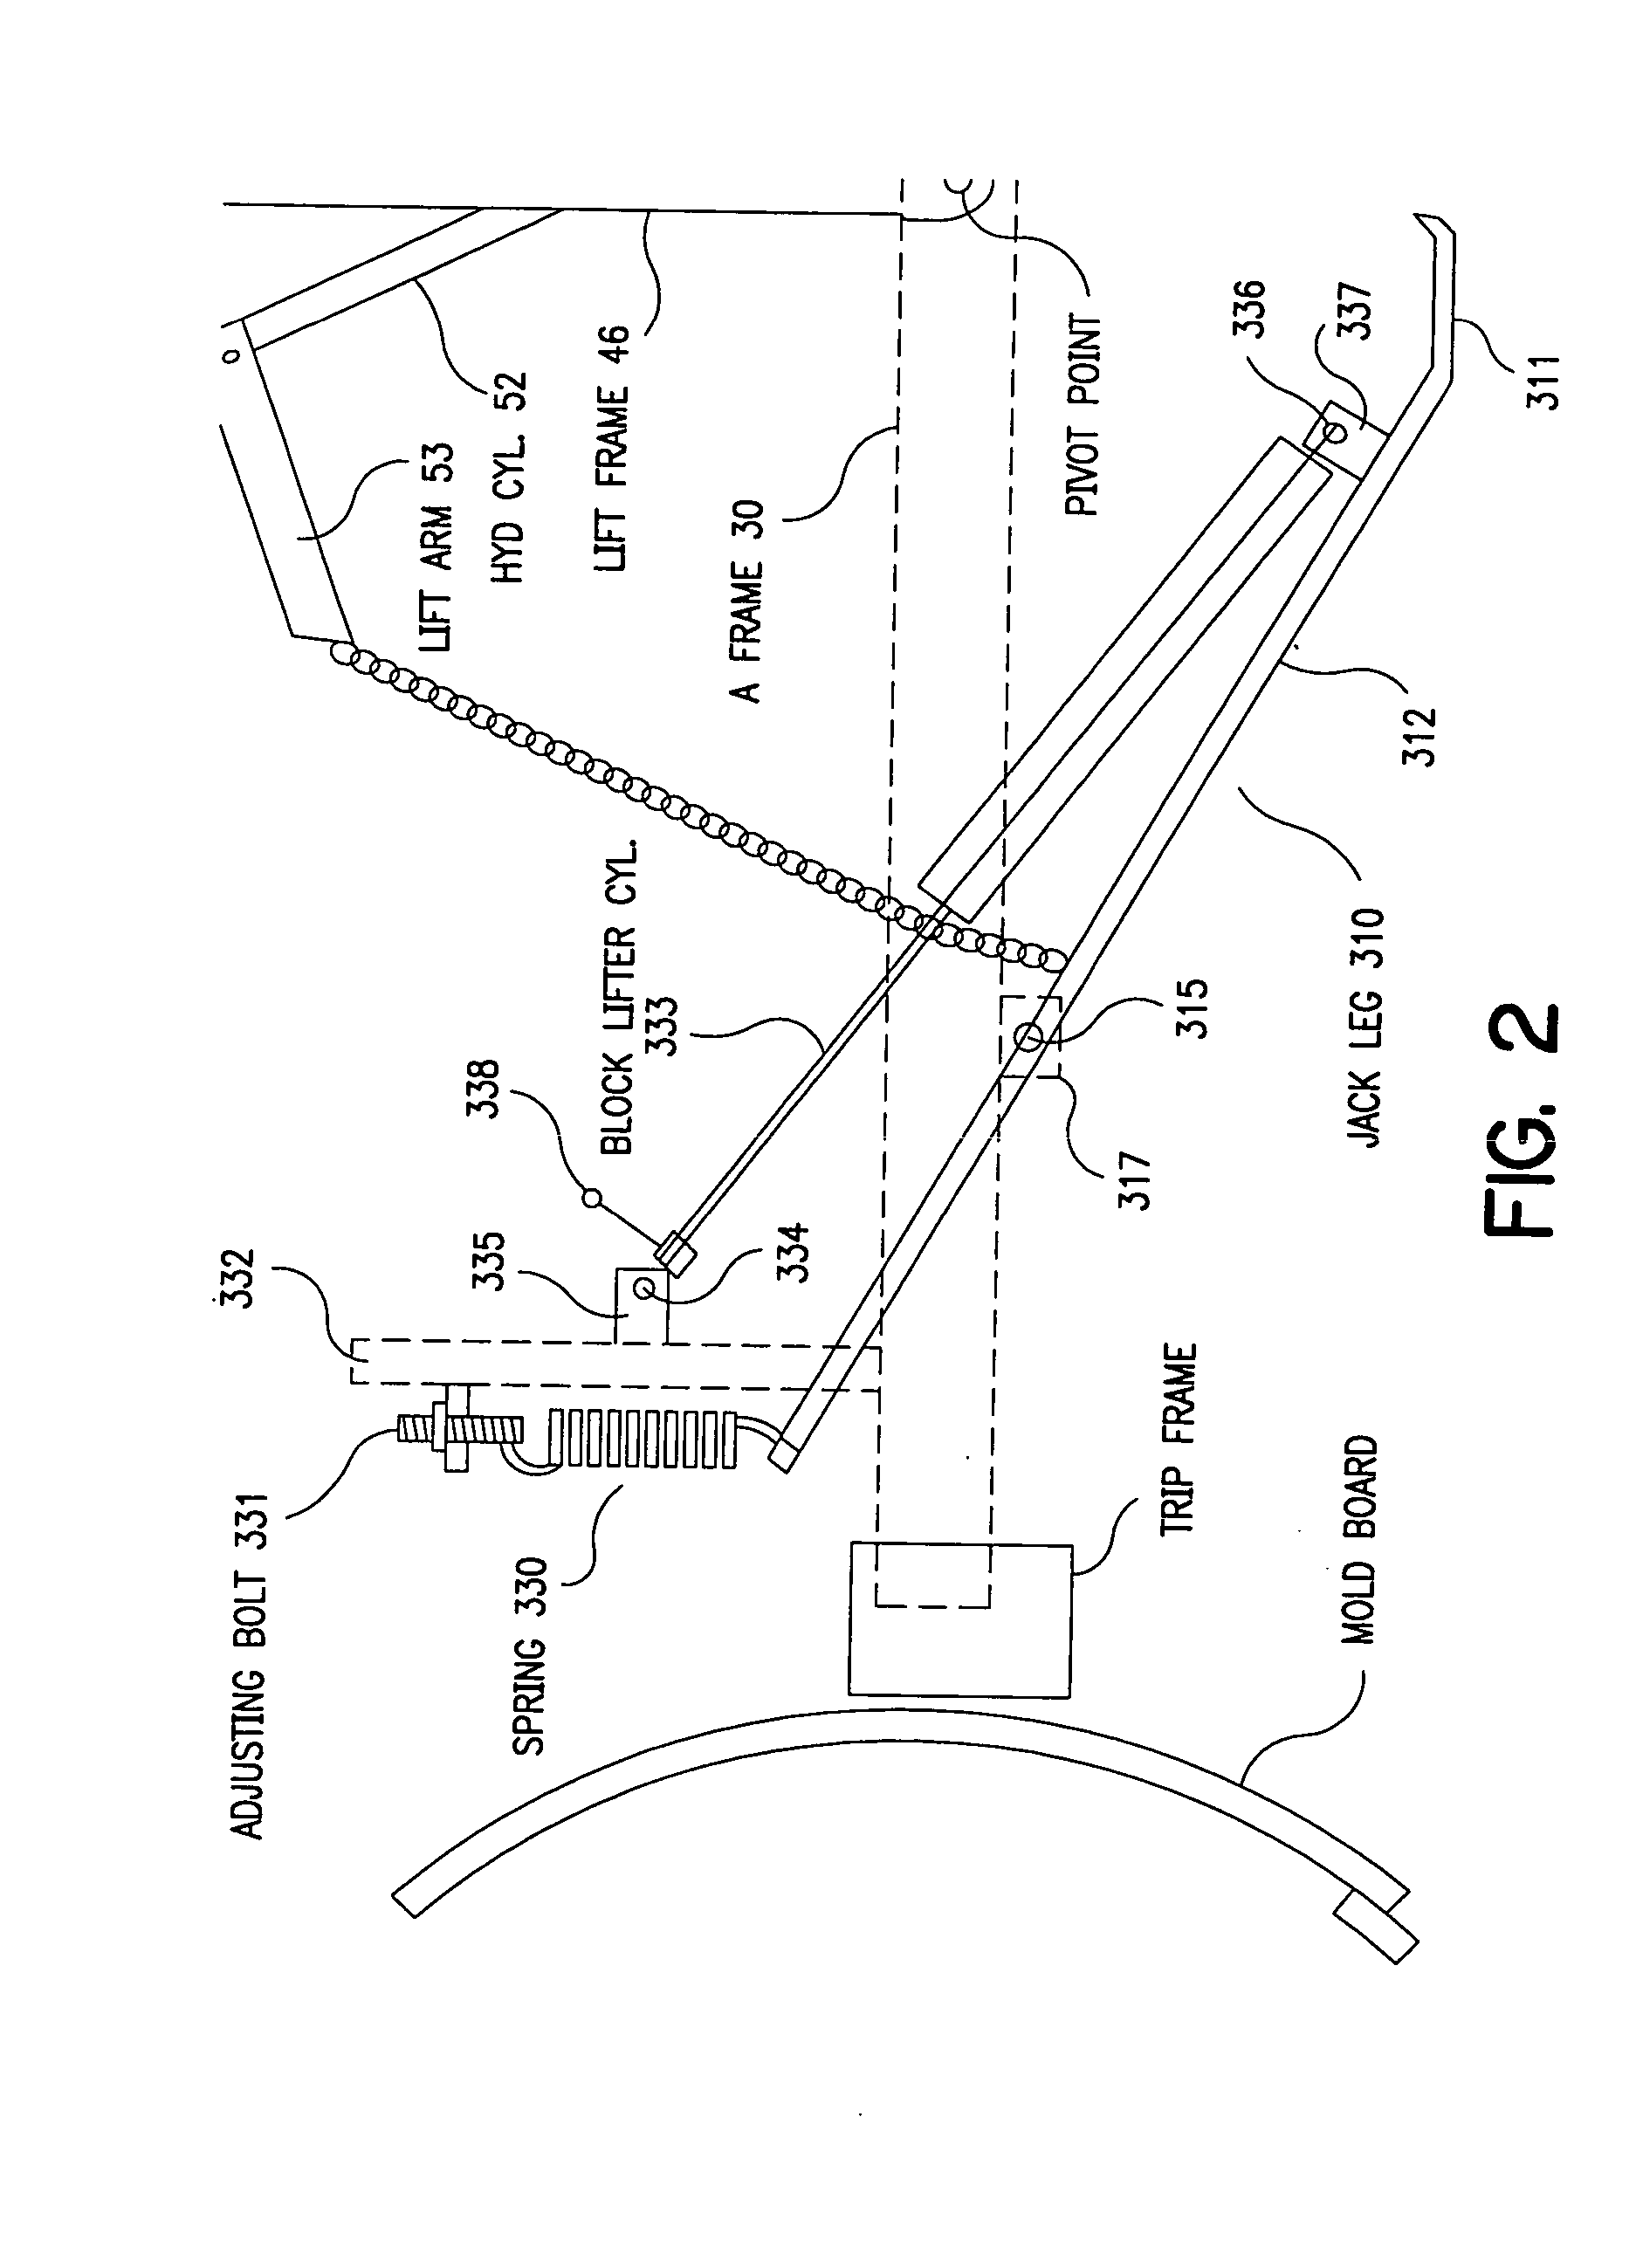 Jack for a working implement and method